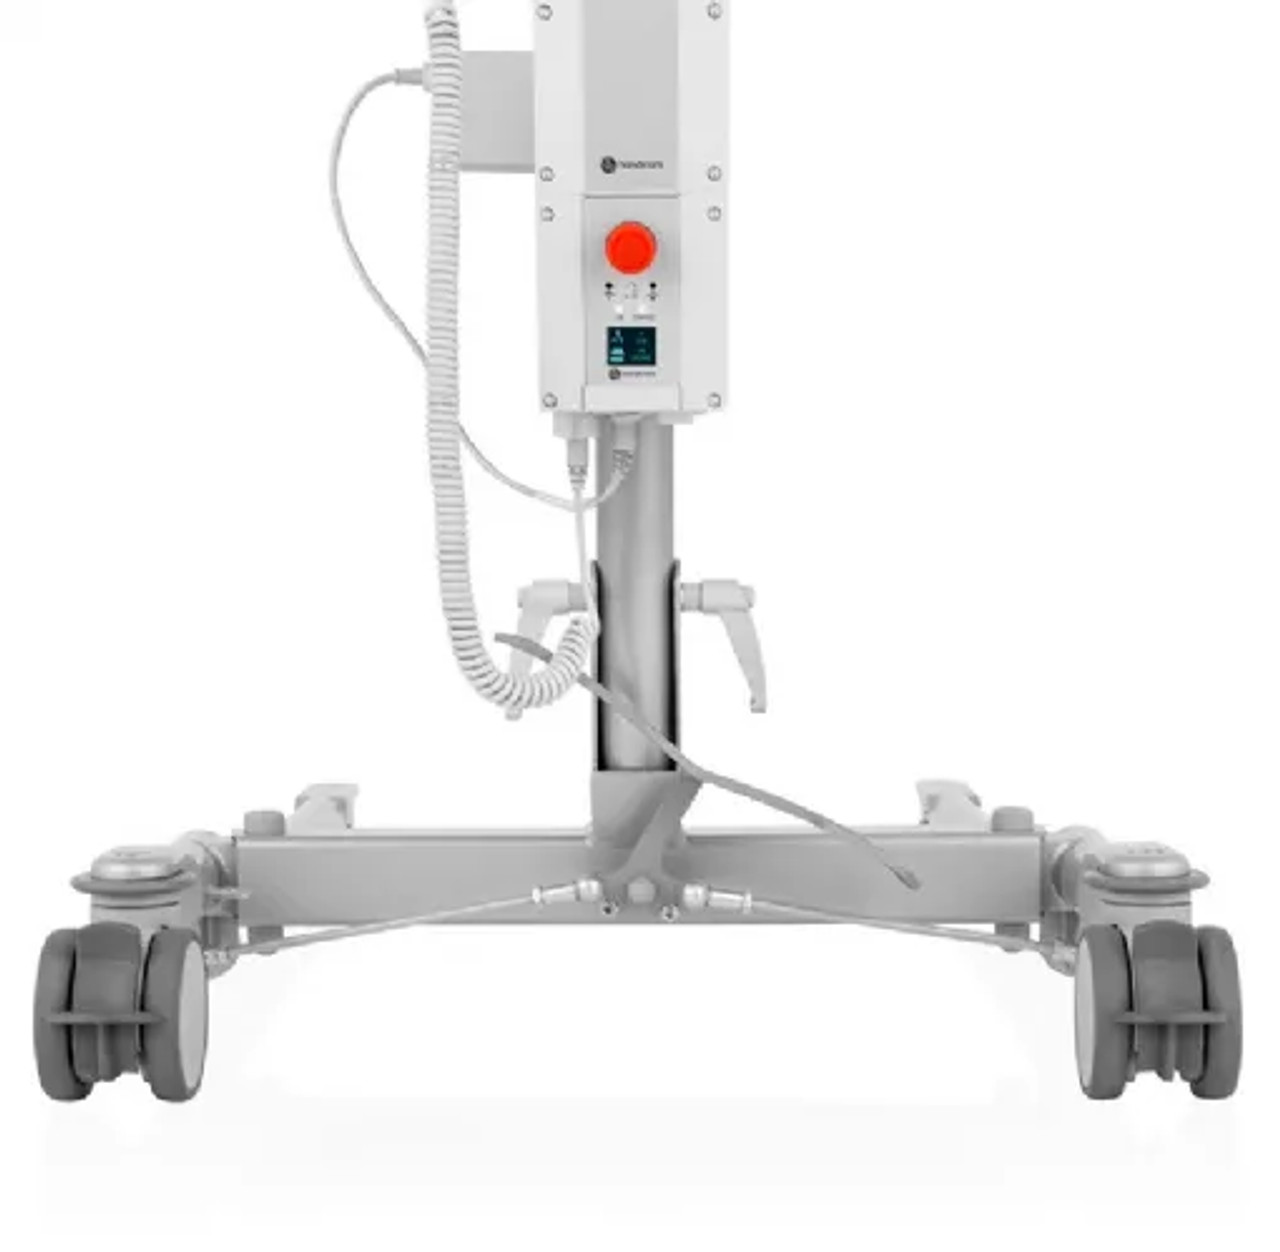 Carina 350 Compact Folding Mobile Patient Lift - Lightweight, Foldable-Chicken Pieces